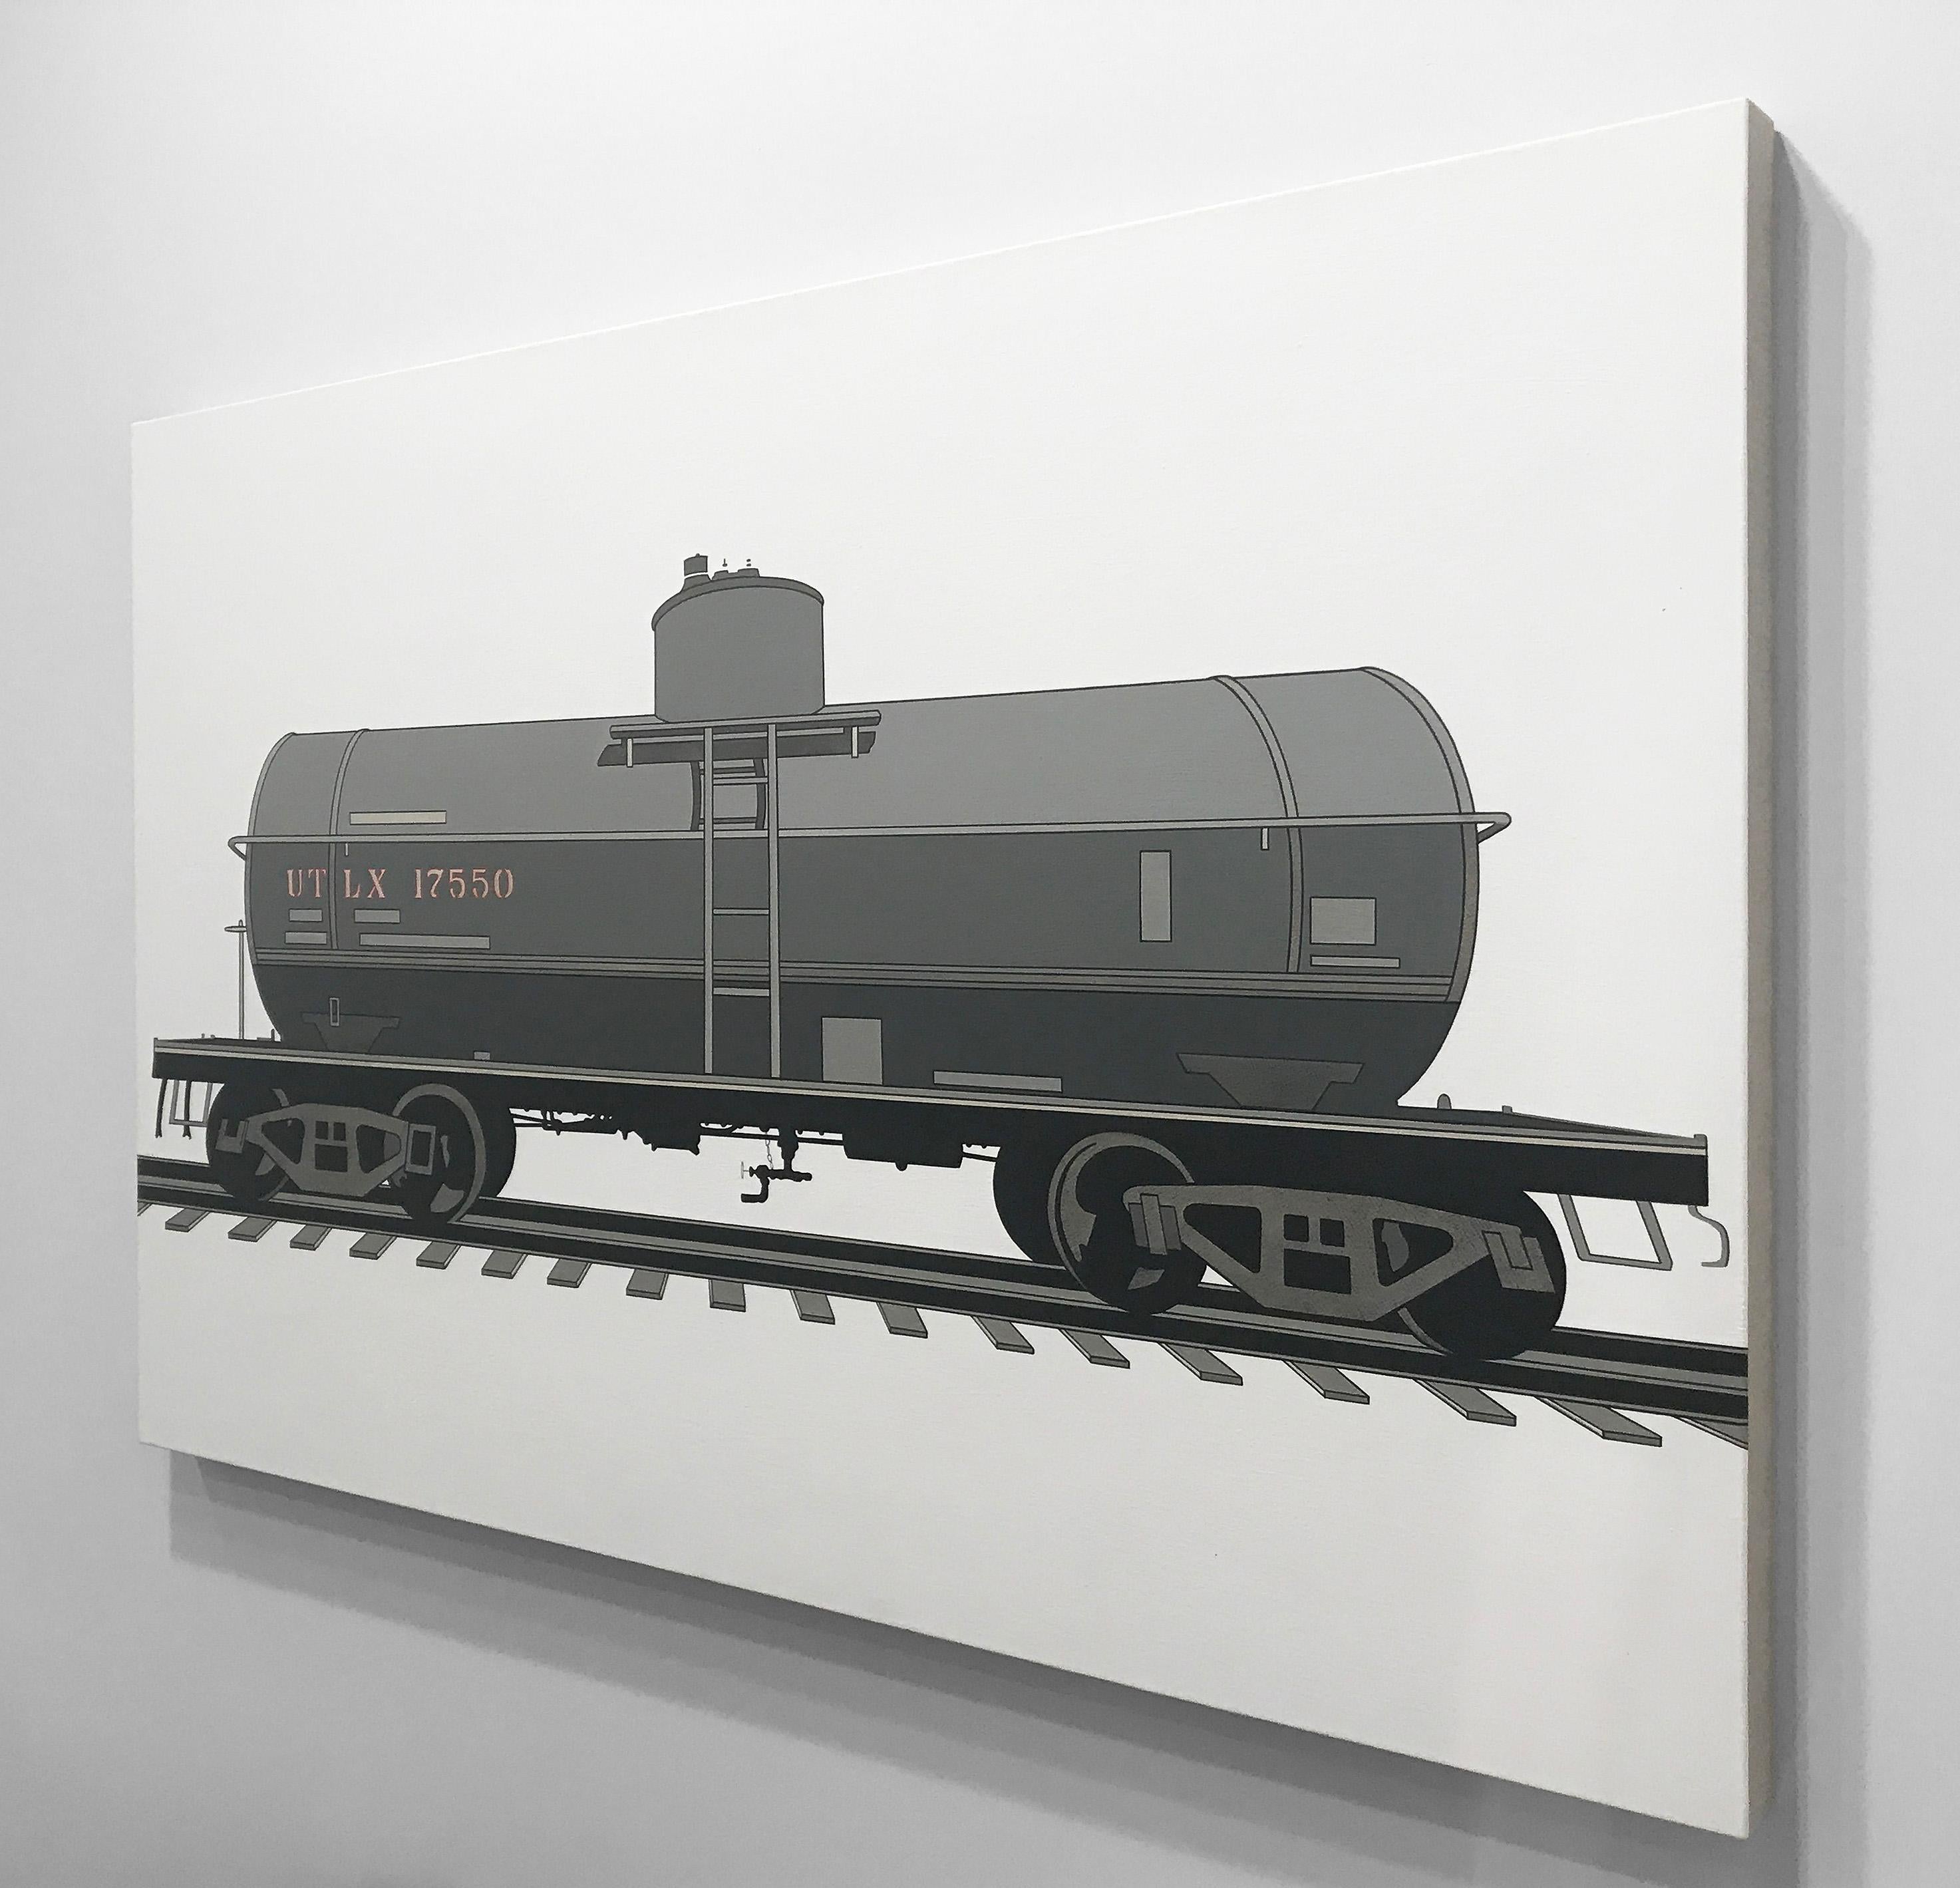 Tanker Car 17550 - Painting by William Steiger